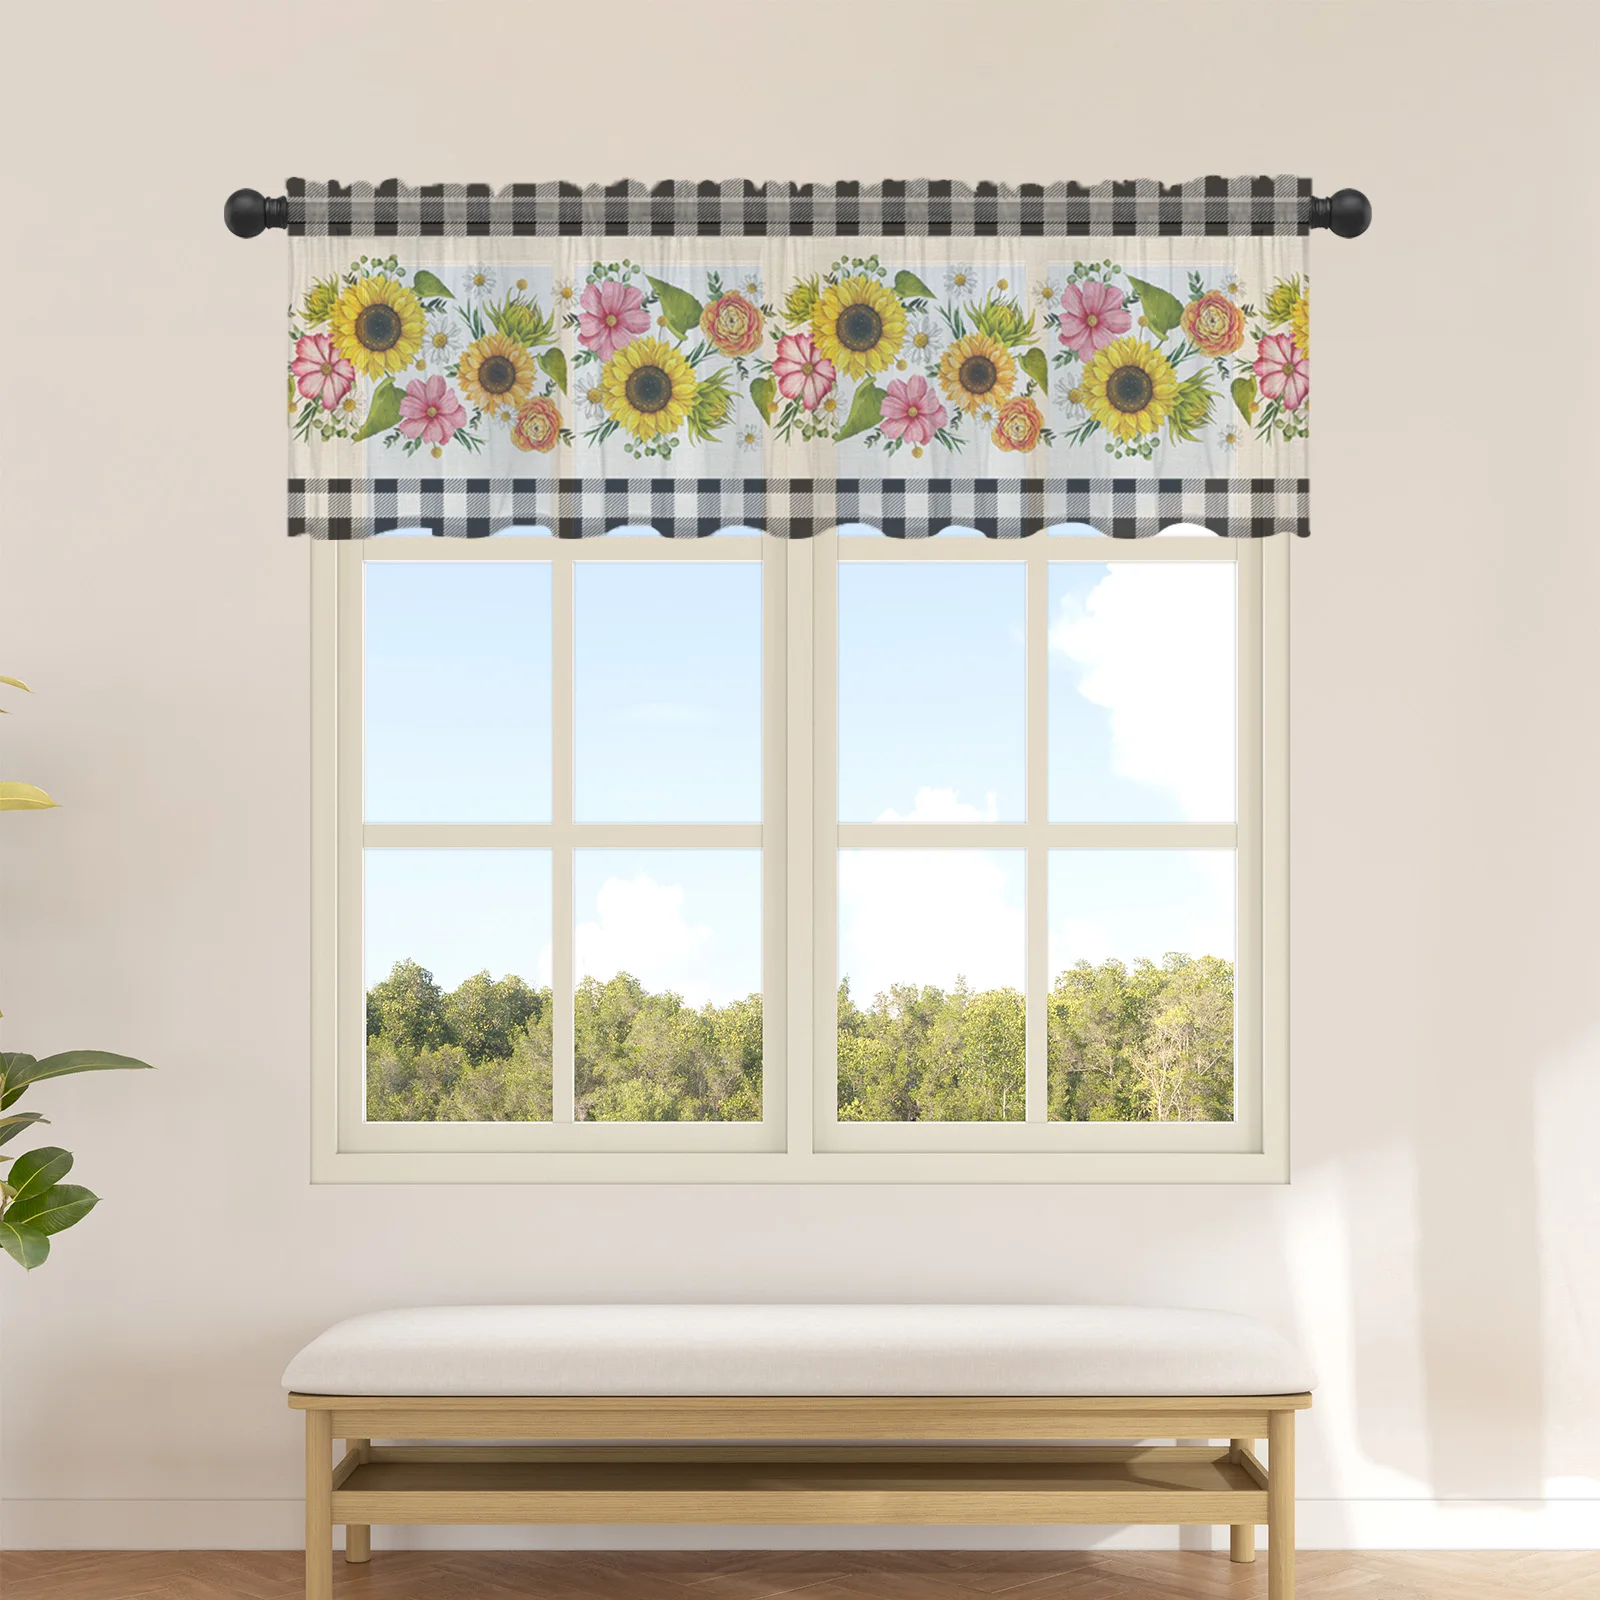 

Pastoral Sunflower Plaid Short Tulle Curtain Kitchen Small Curtain Sheer Curtain Living Room Home Decor Voile Drapes